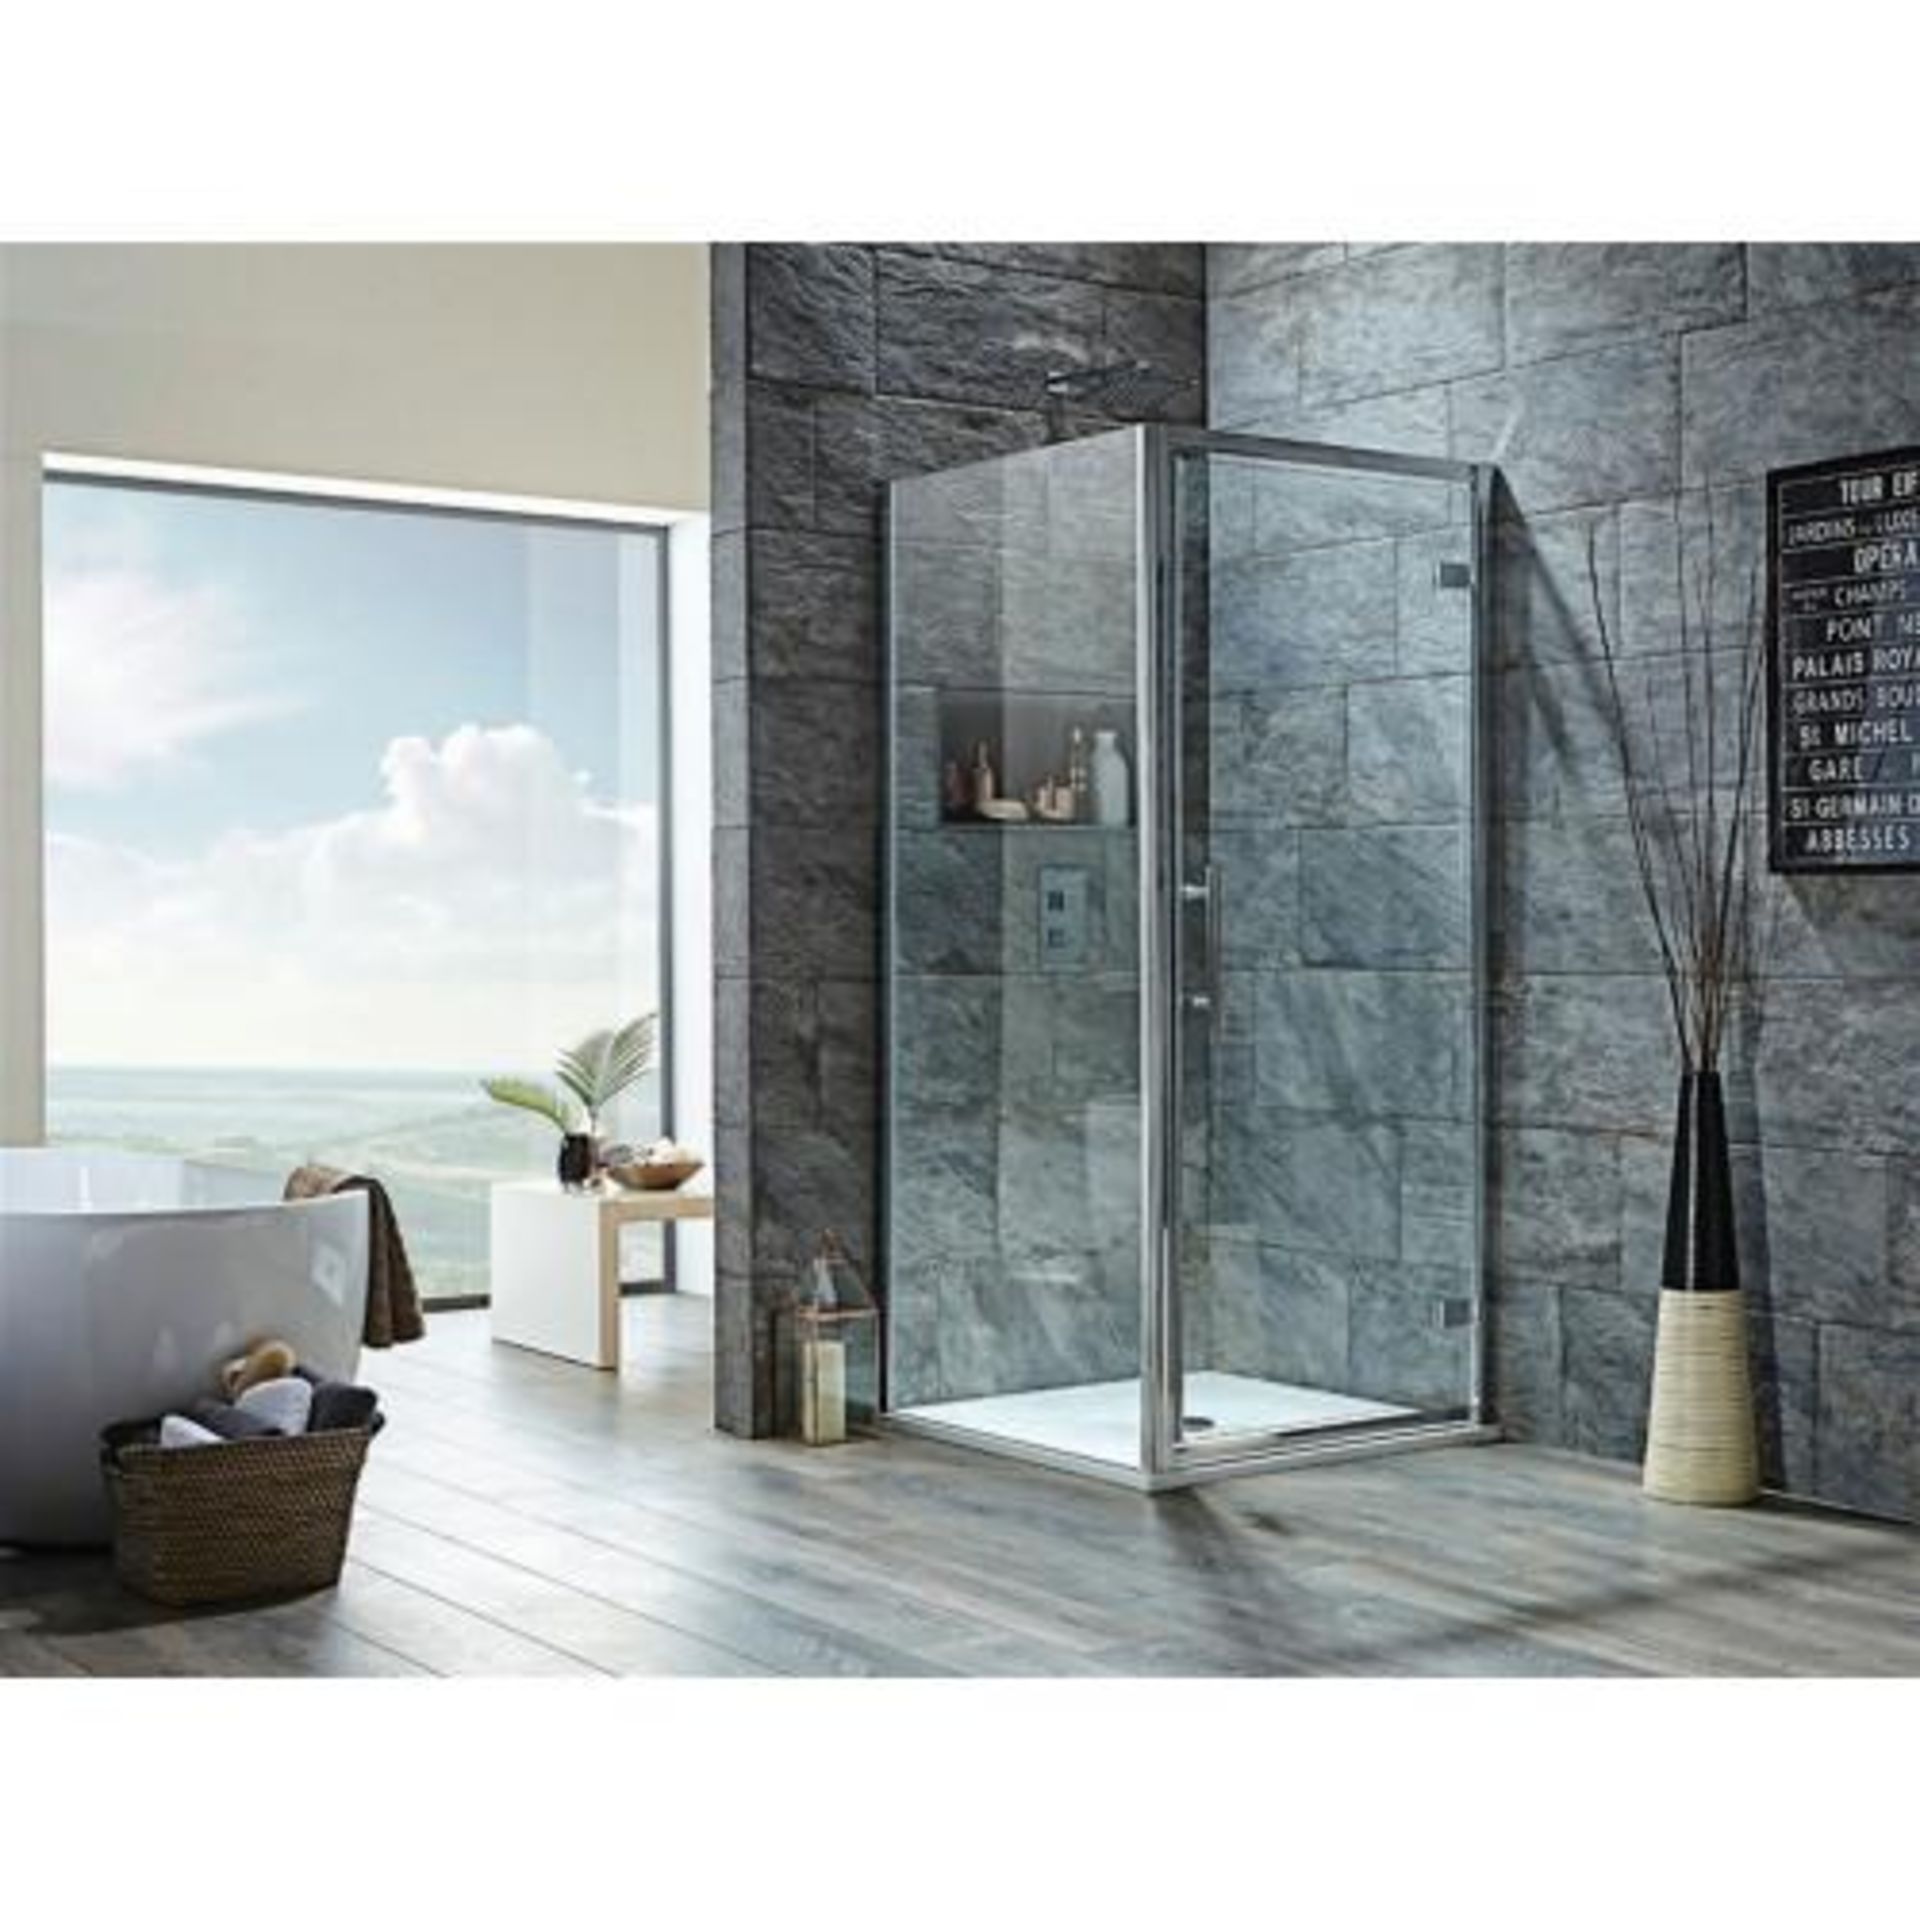 1 x Scudo S8 Hinged Door Shower Enclosure (700x1900) - New & Boxed Stock - Ref: SCUD700HD - CL406 -